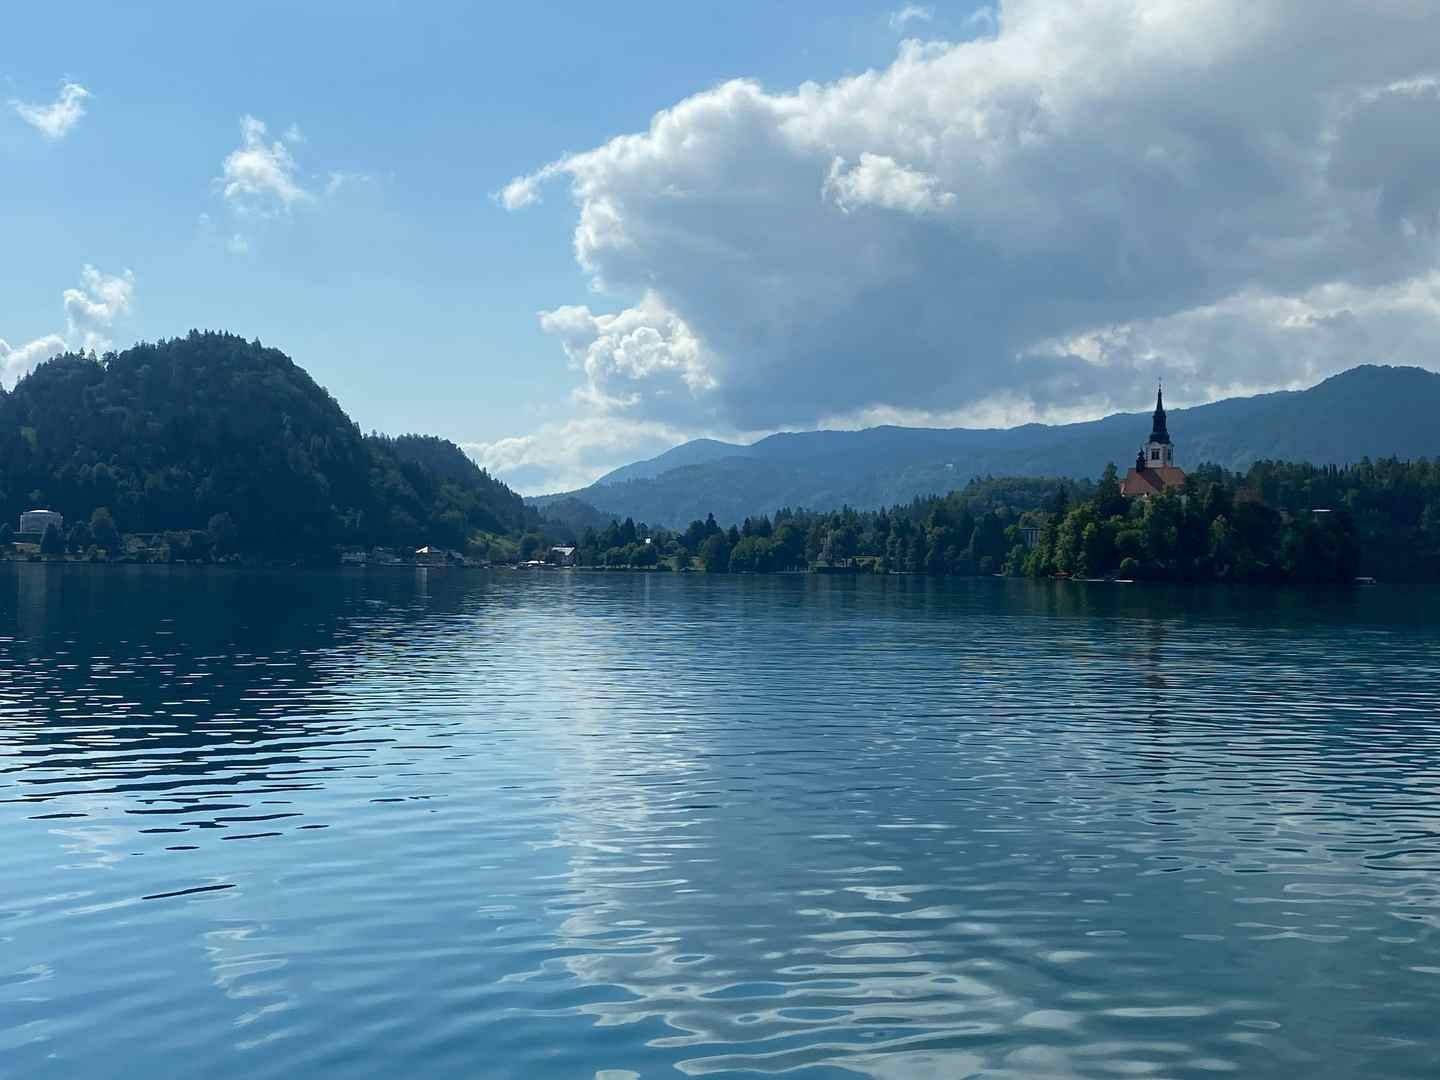 This trip exceeded my expectations. Sloveni...